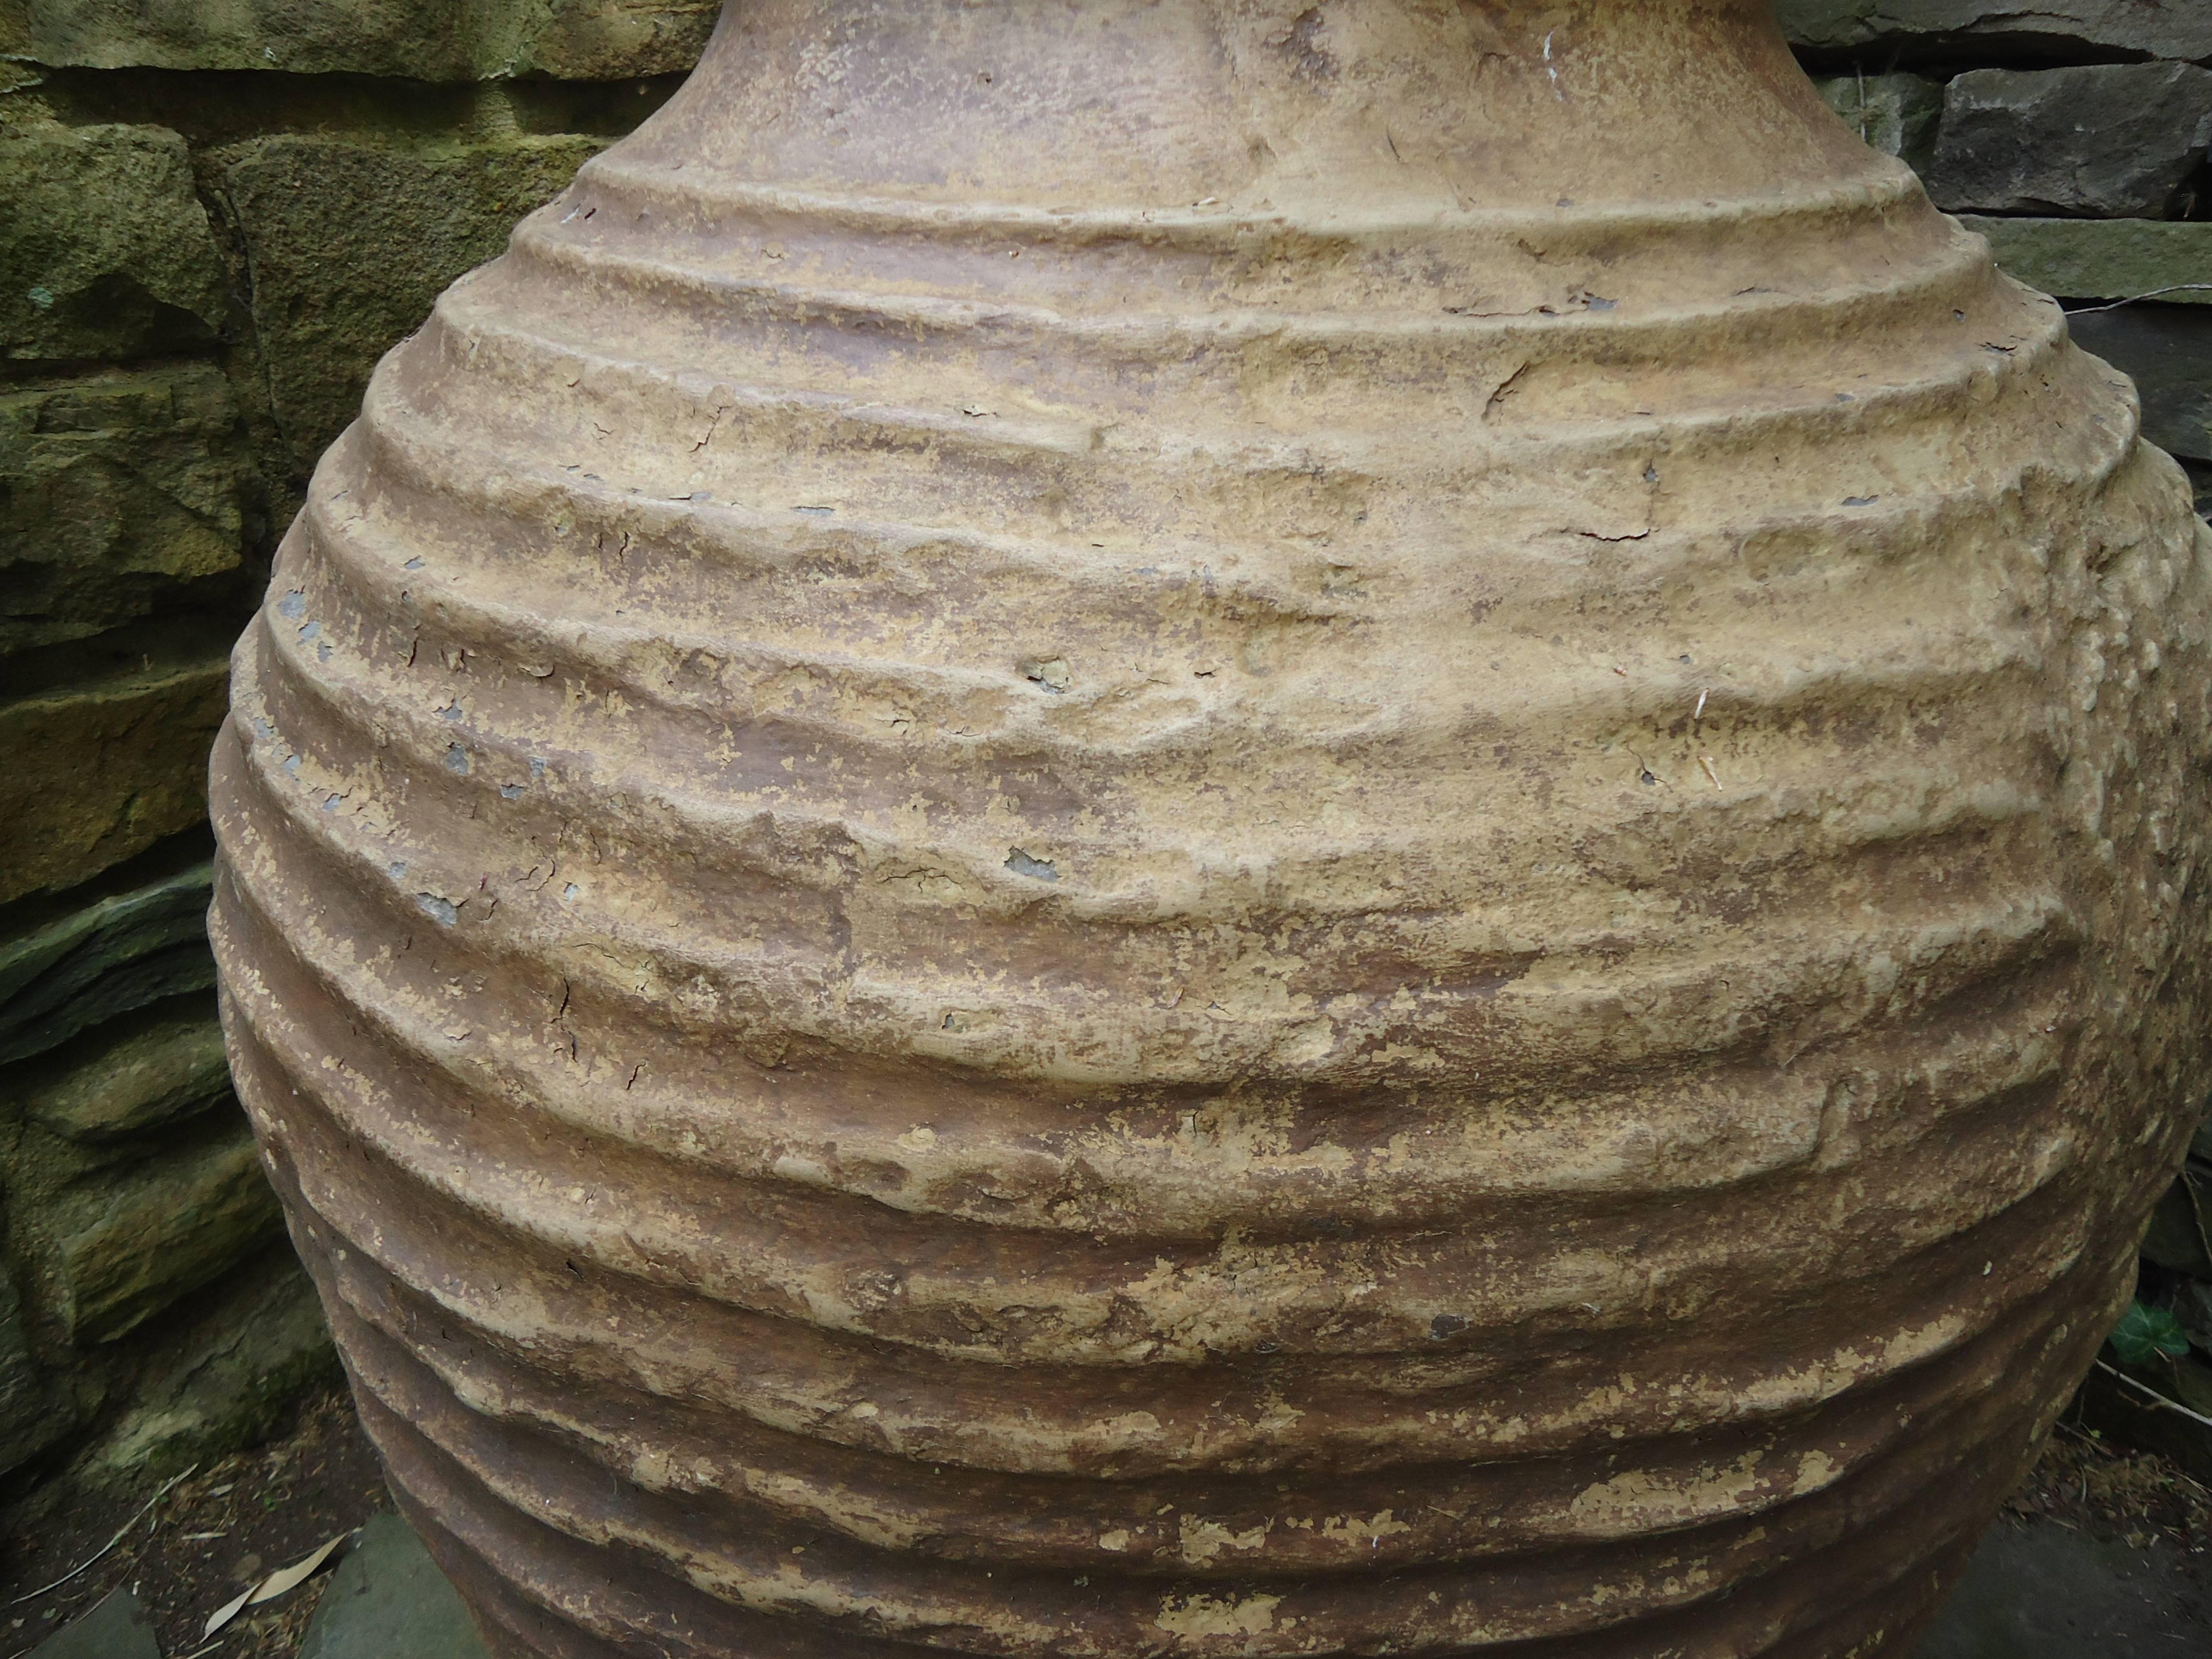 Large fiberglass resin Cretan urn hand cast from the original antique urn, having intricate details and a rich weathered clay hand-painted faux finish. This high quality medium is impervious to weather, durable and maintenance free. It’s also very